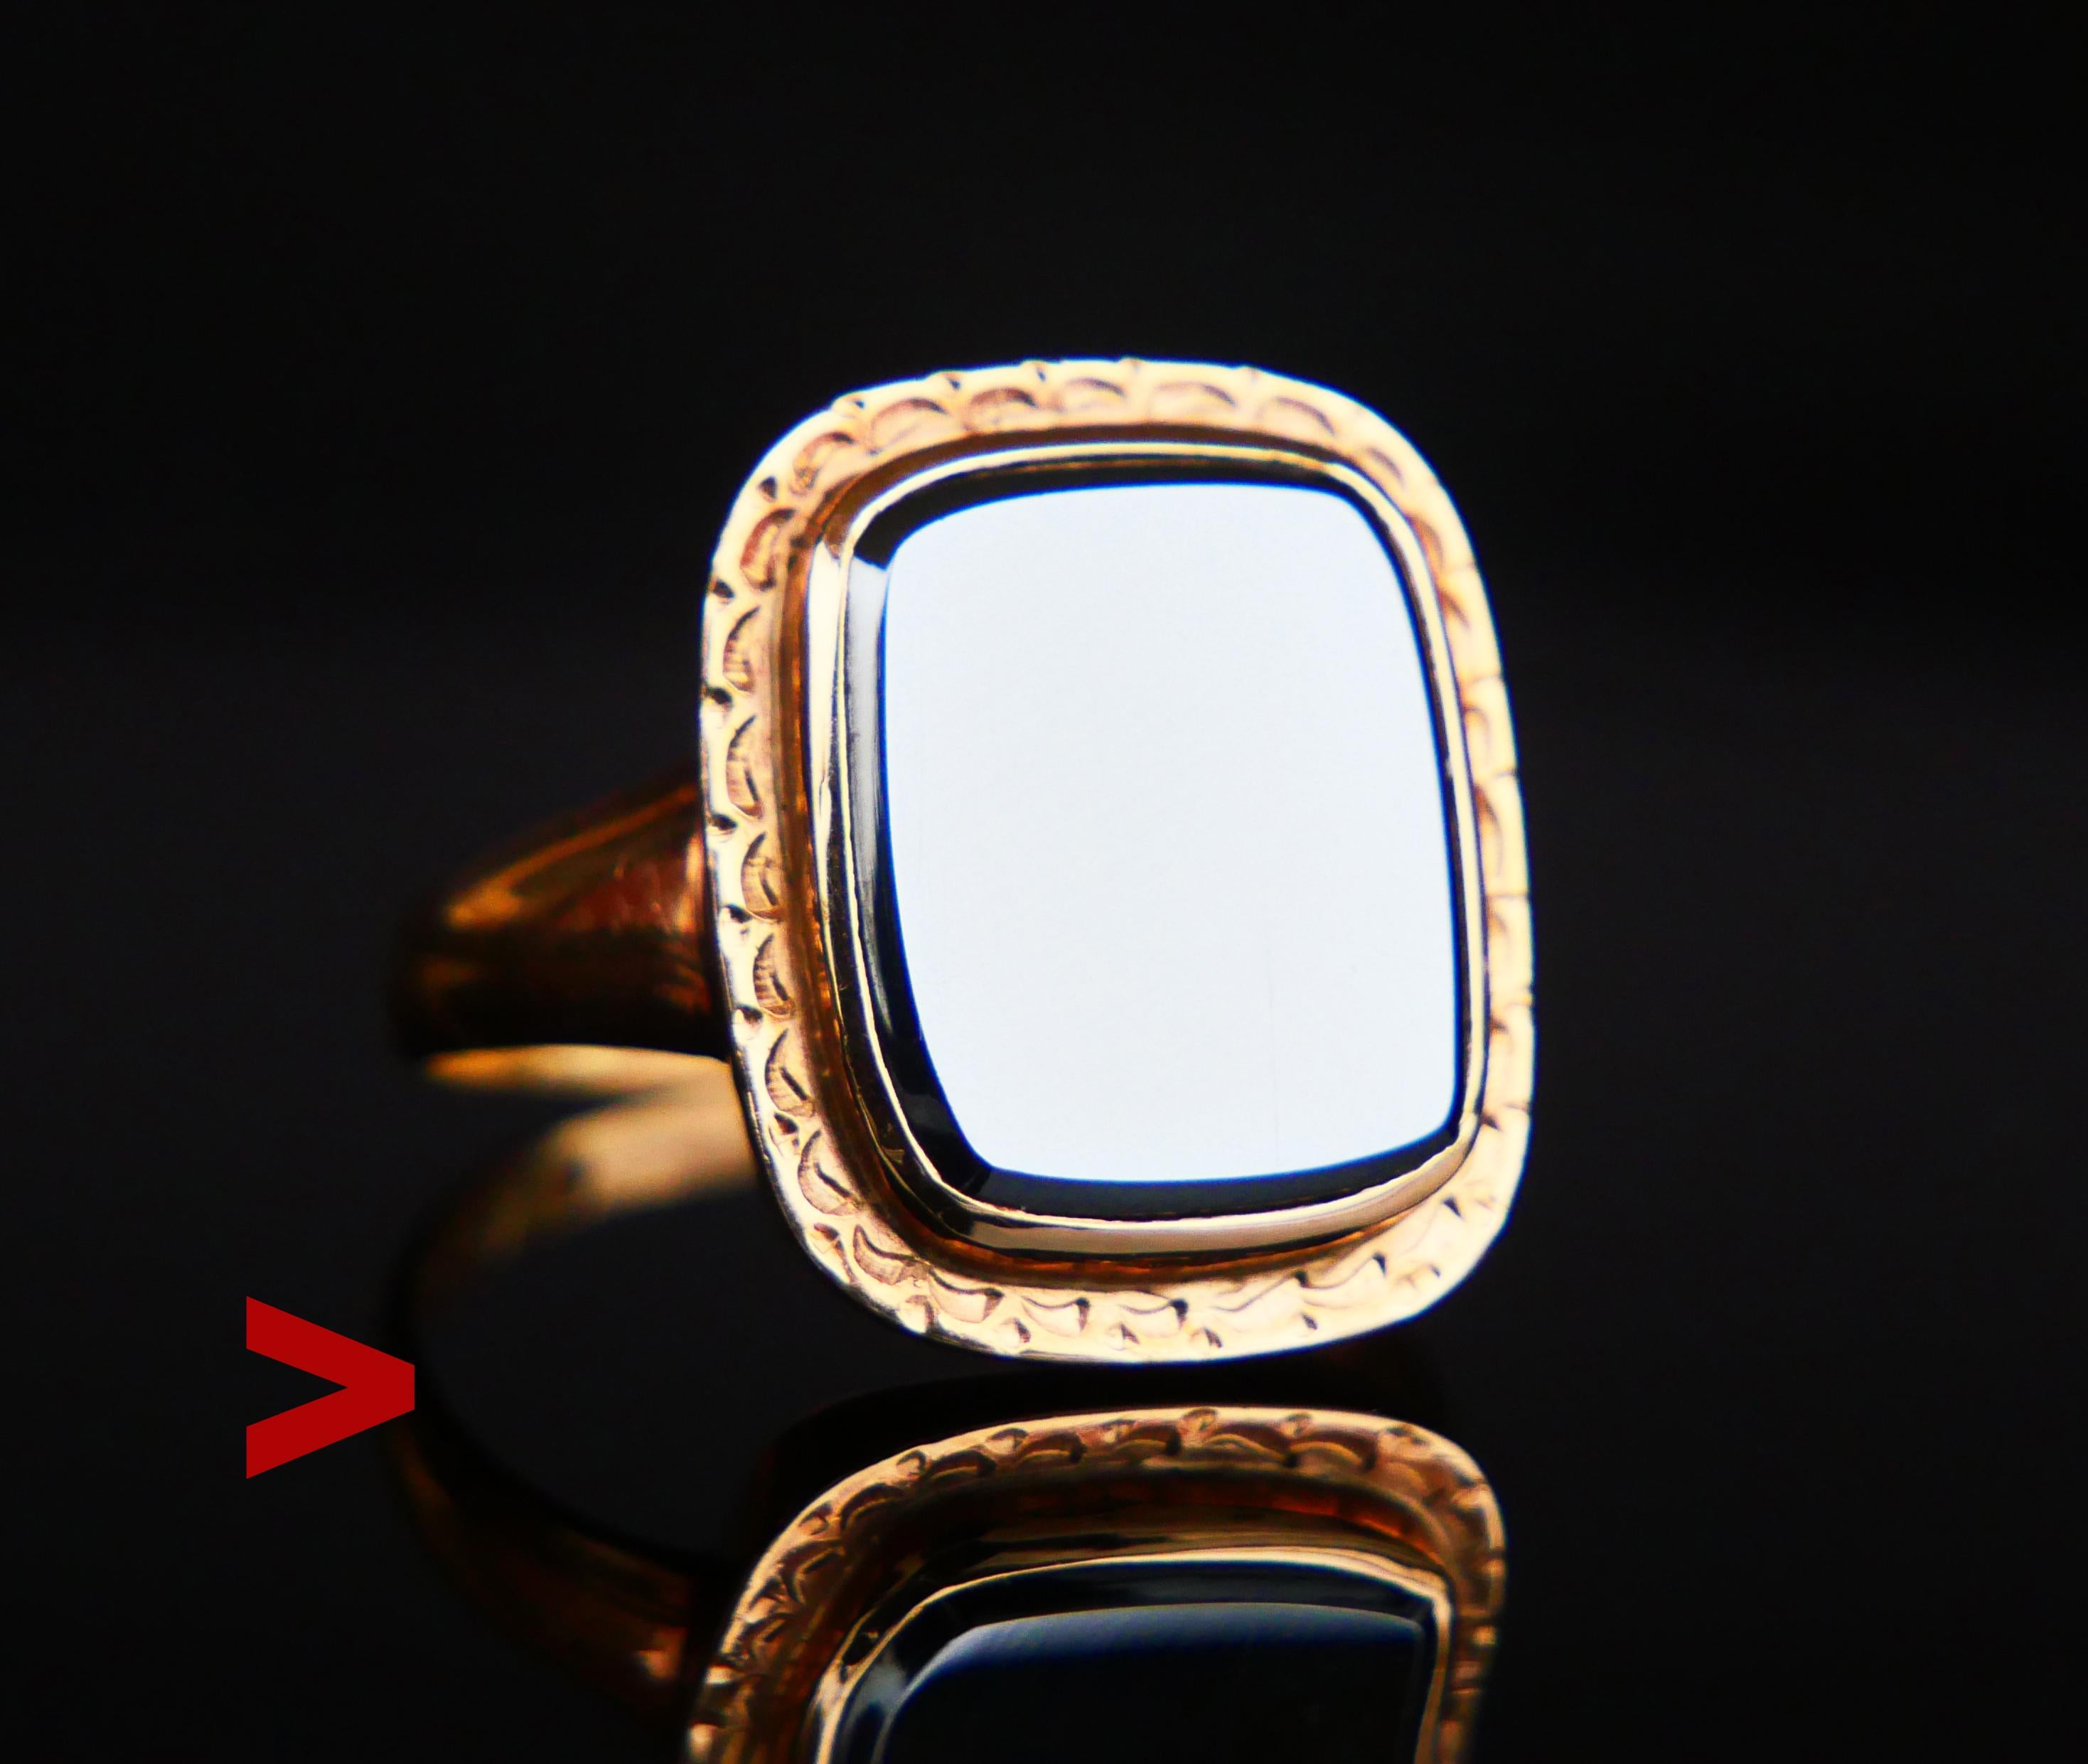 Men Signet Ring in elegant design  decorated with highly reflective stone.

Full set of Swedish hallmarks , 18k, maker's and date code is S8 / made in 1944.

Crown is 18 mm x 15 mm x 4mm, with engraved decor on the edge.Orange Gold, radiant cut